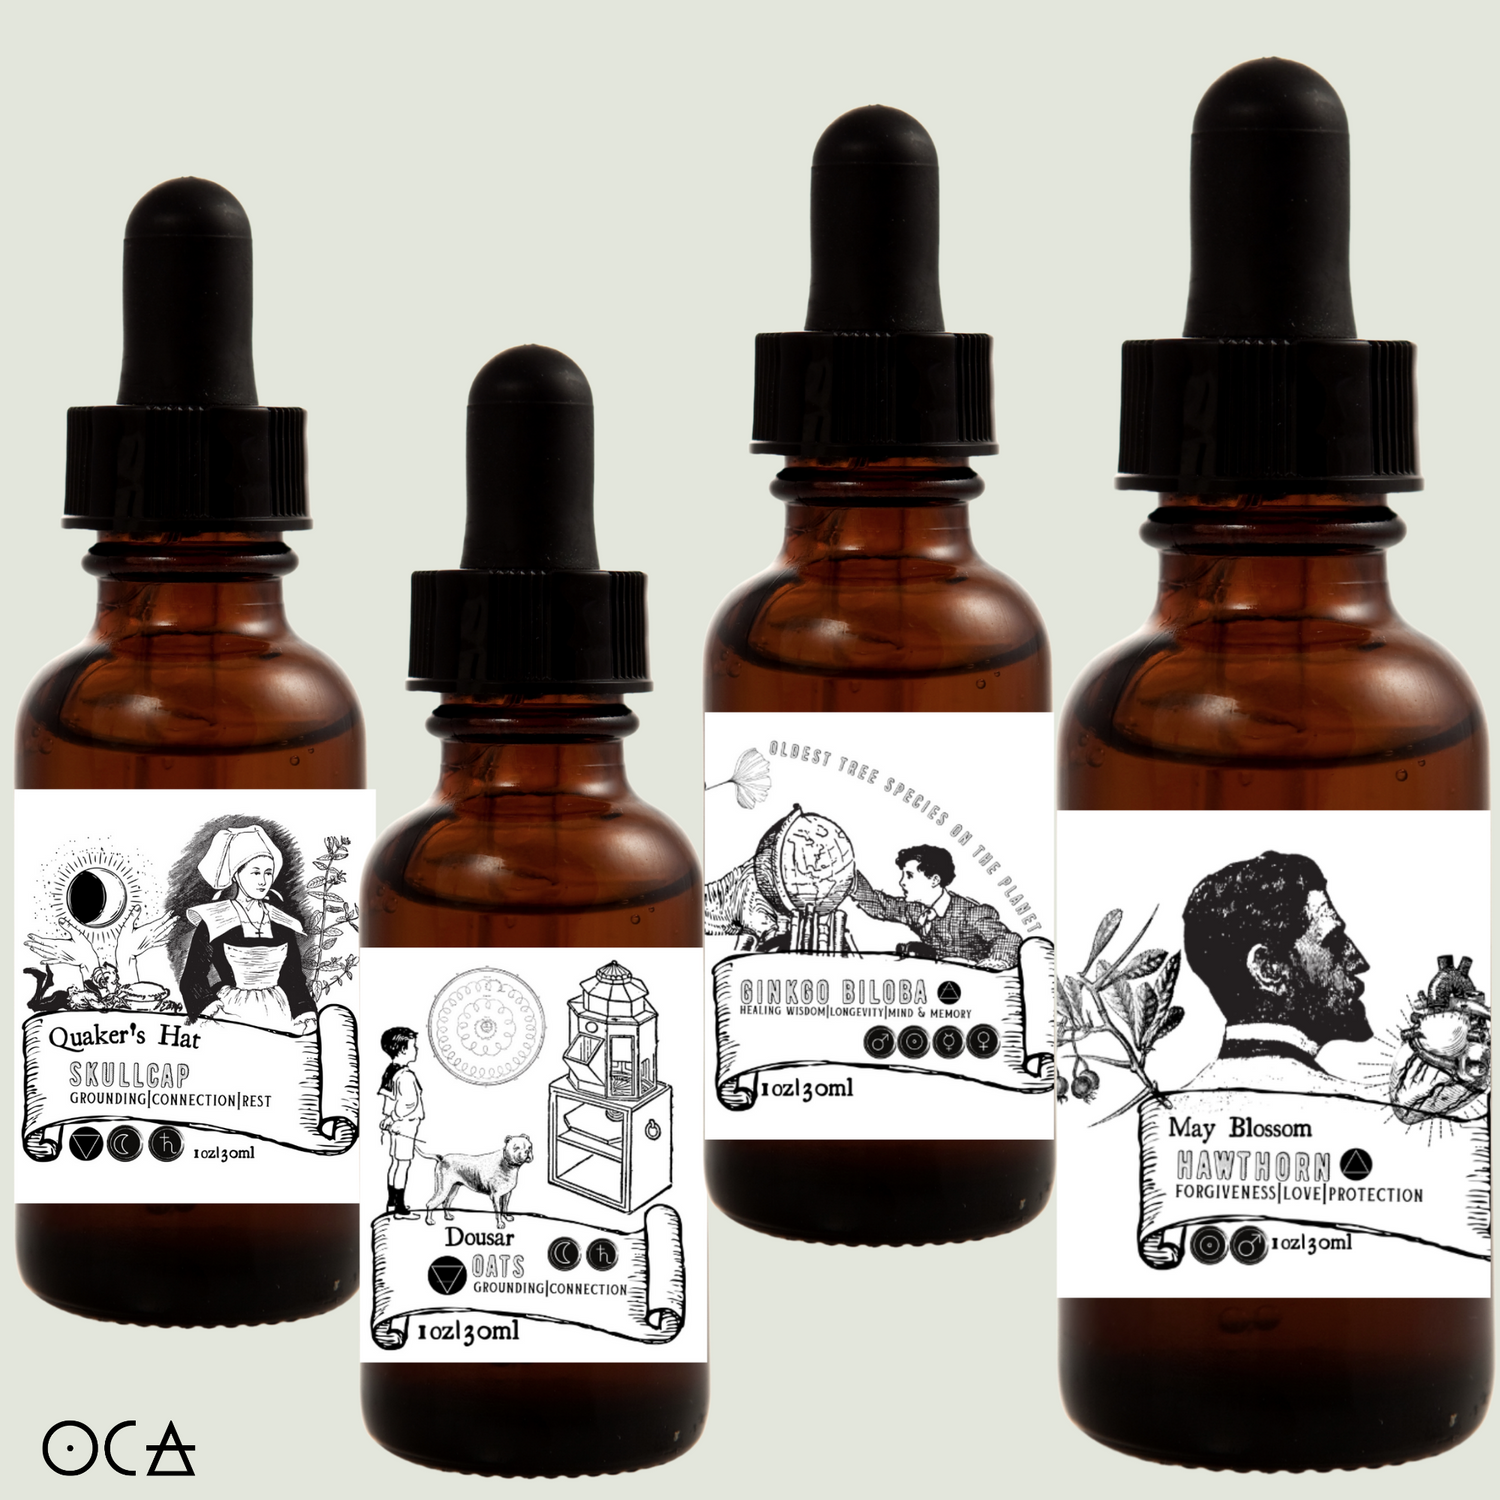 Cleavers Herbal Tincture - Original City Apothecary